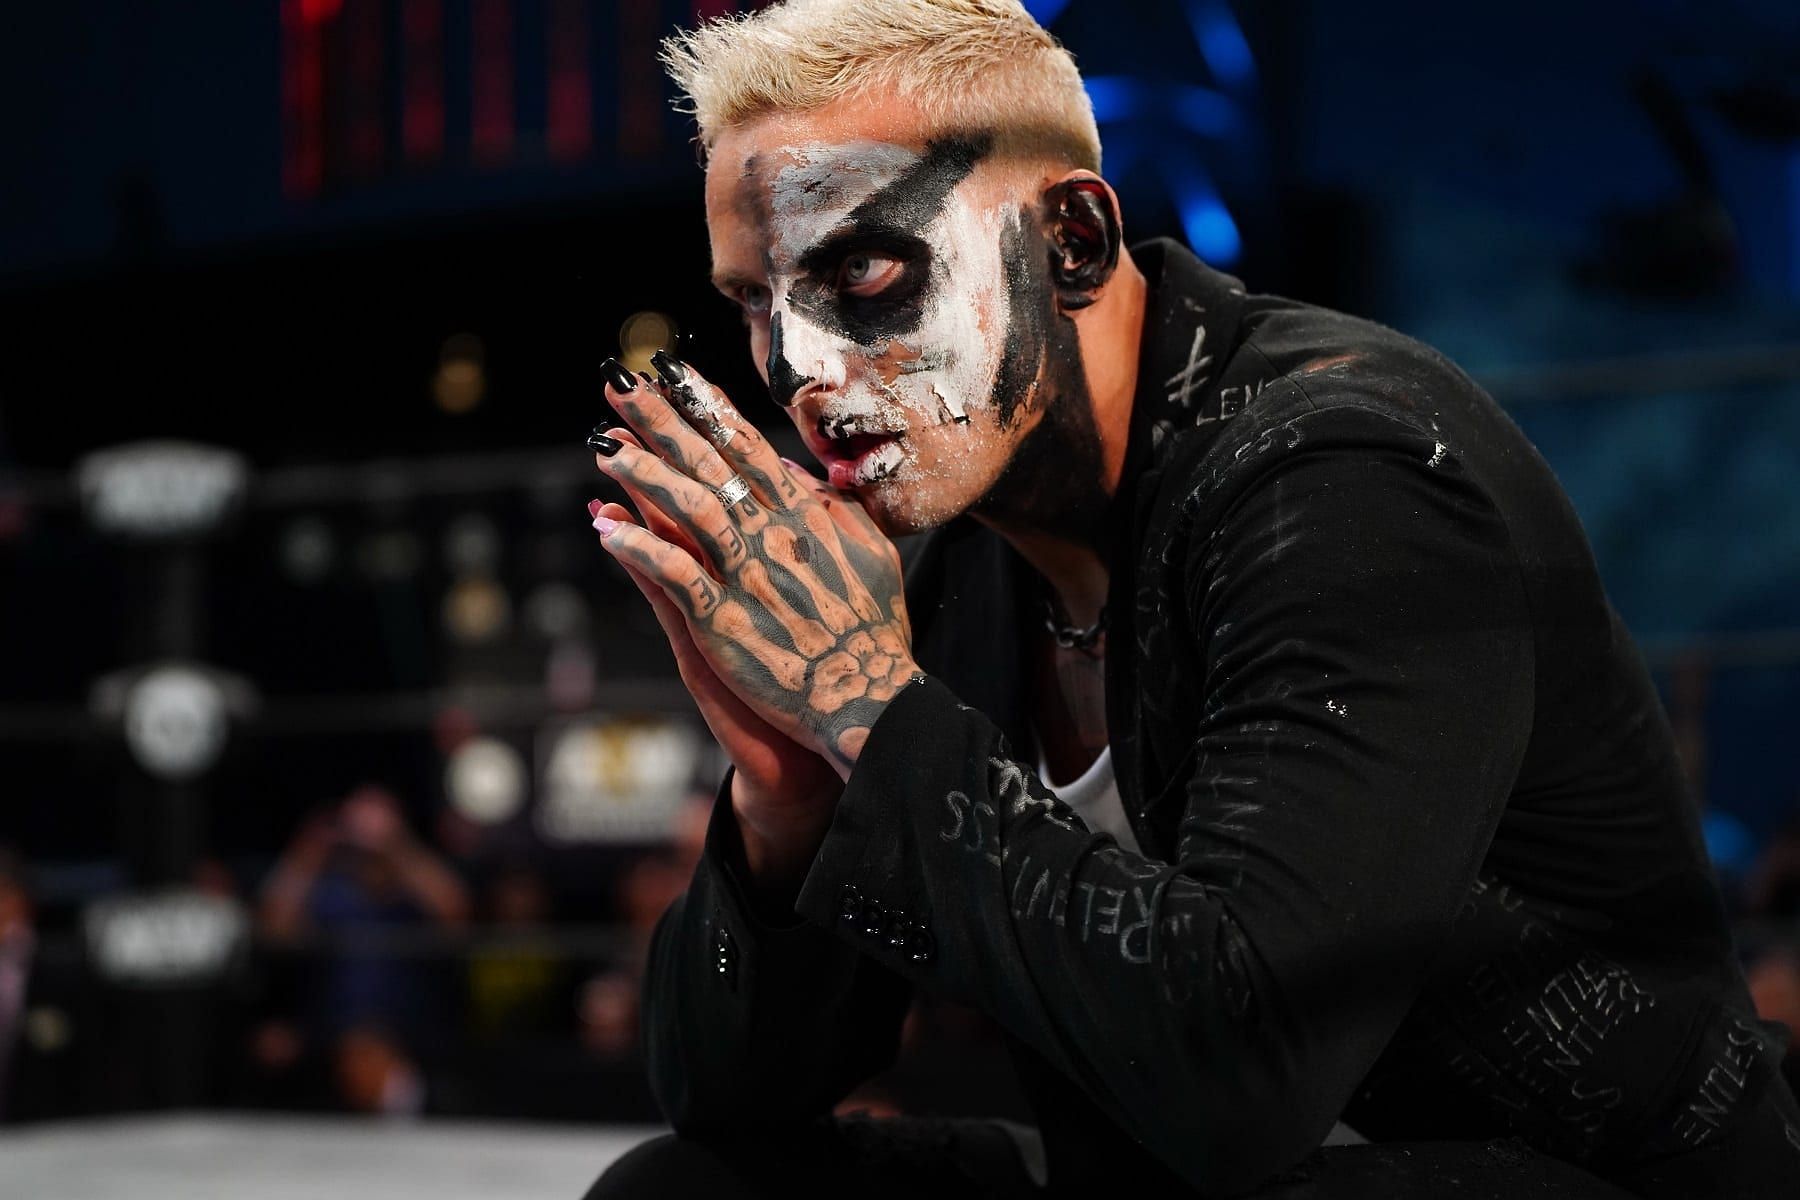 Darby Allin was credited for scouting Nick Wayne